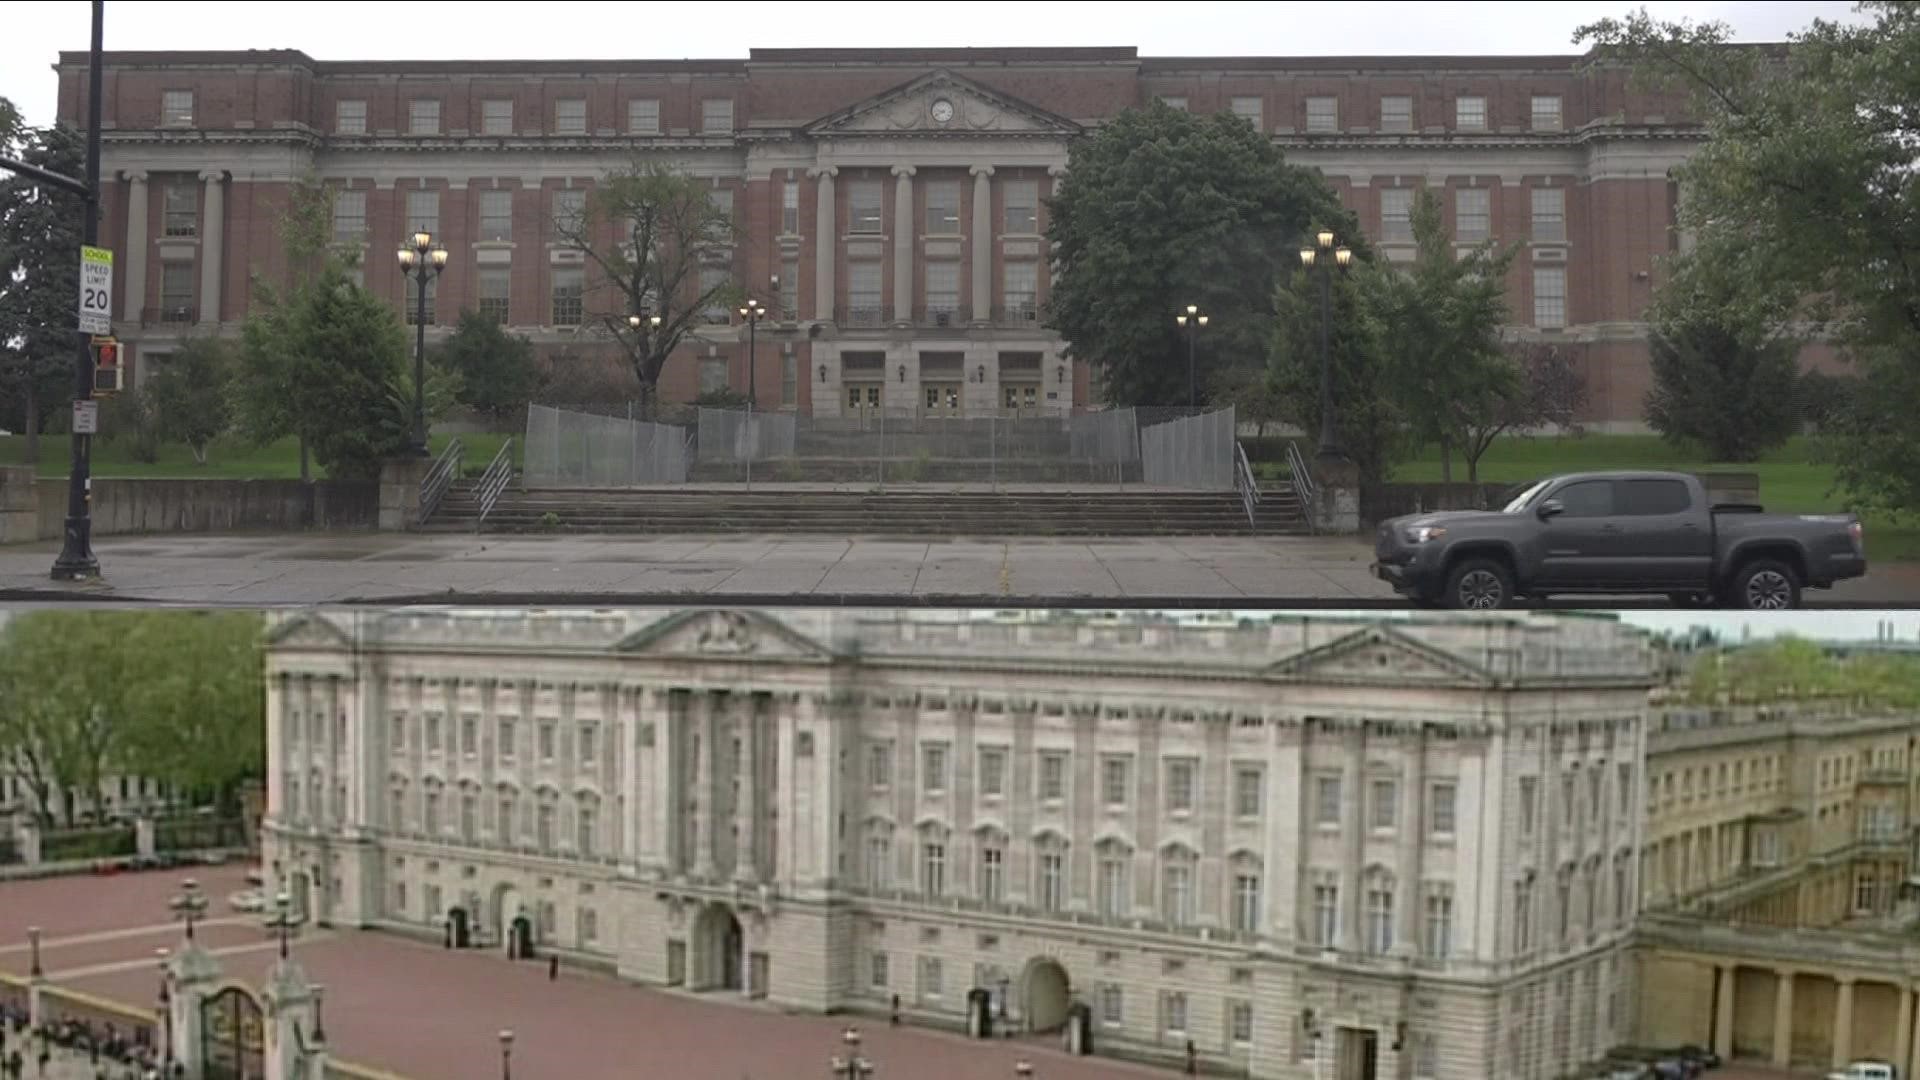 Bennett High School was built in 1925 and the architect was inspired by the East Wing of Buckingham Palace.